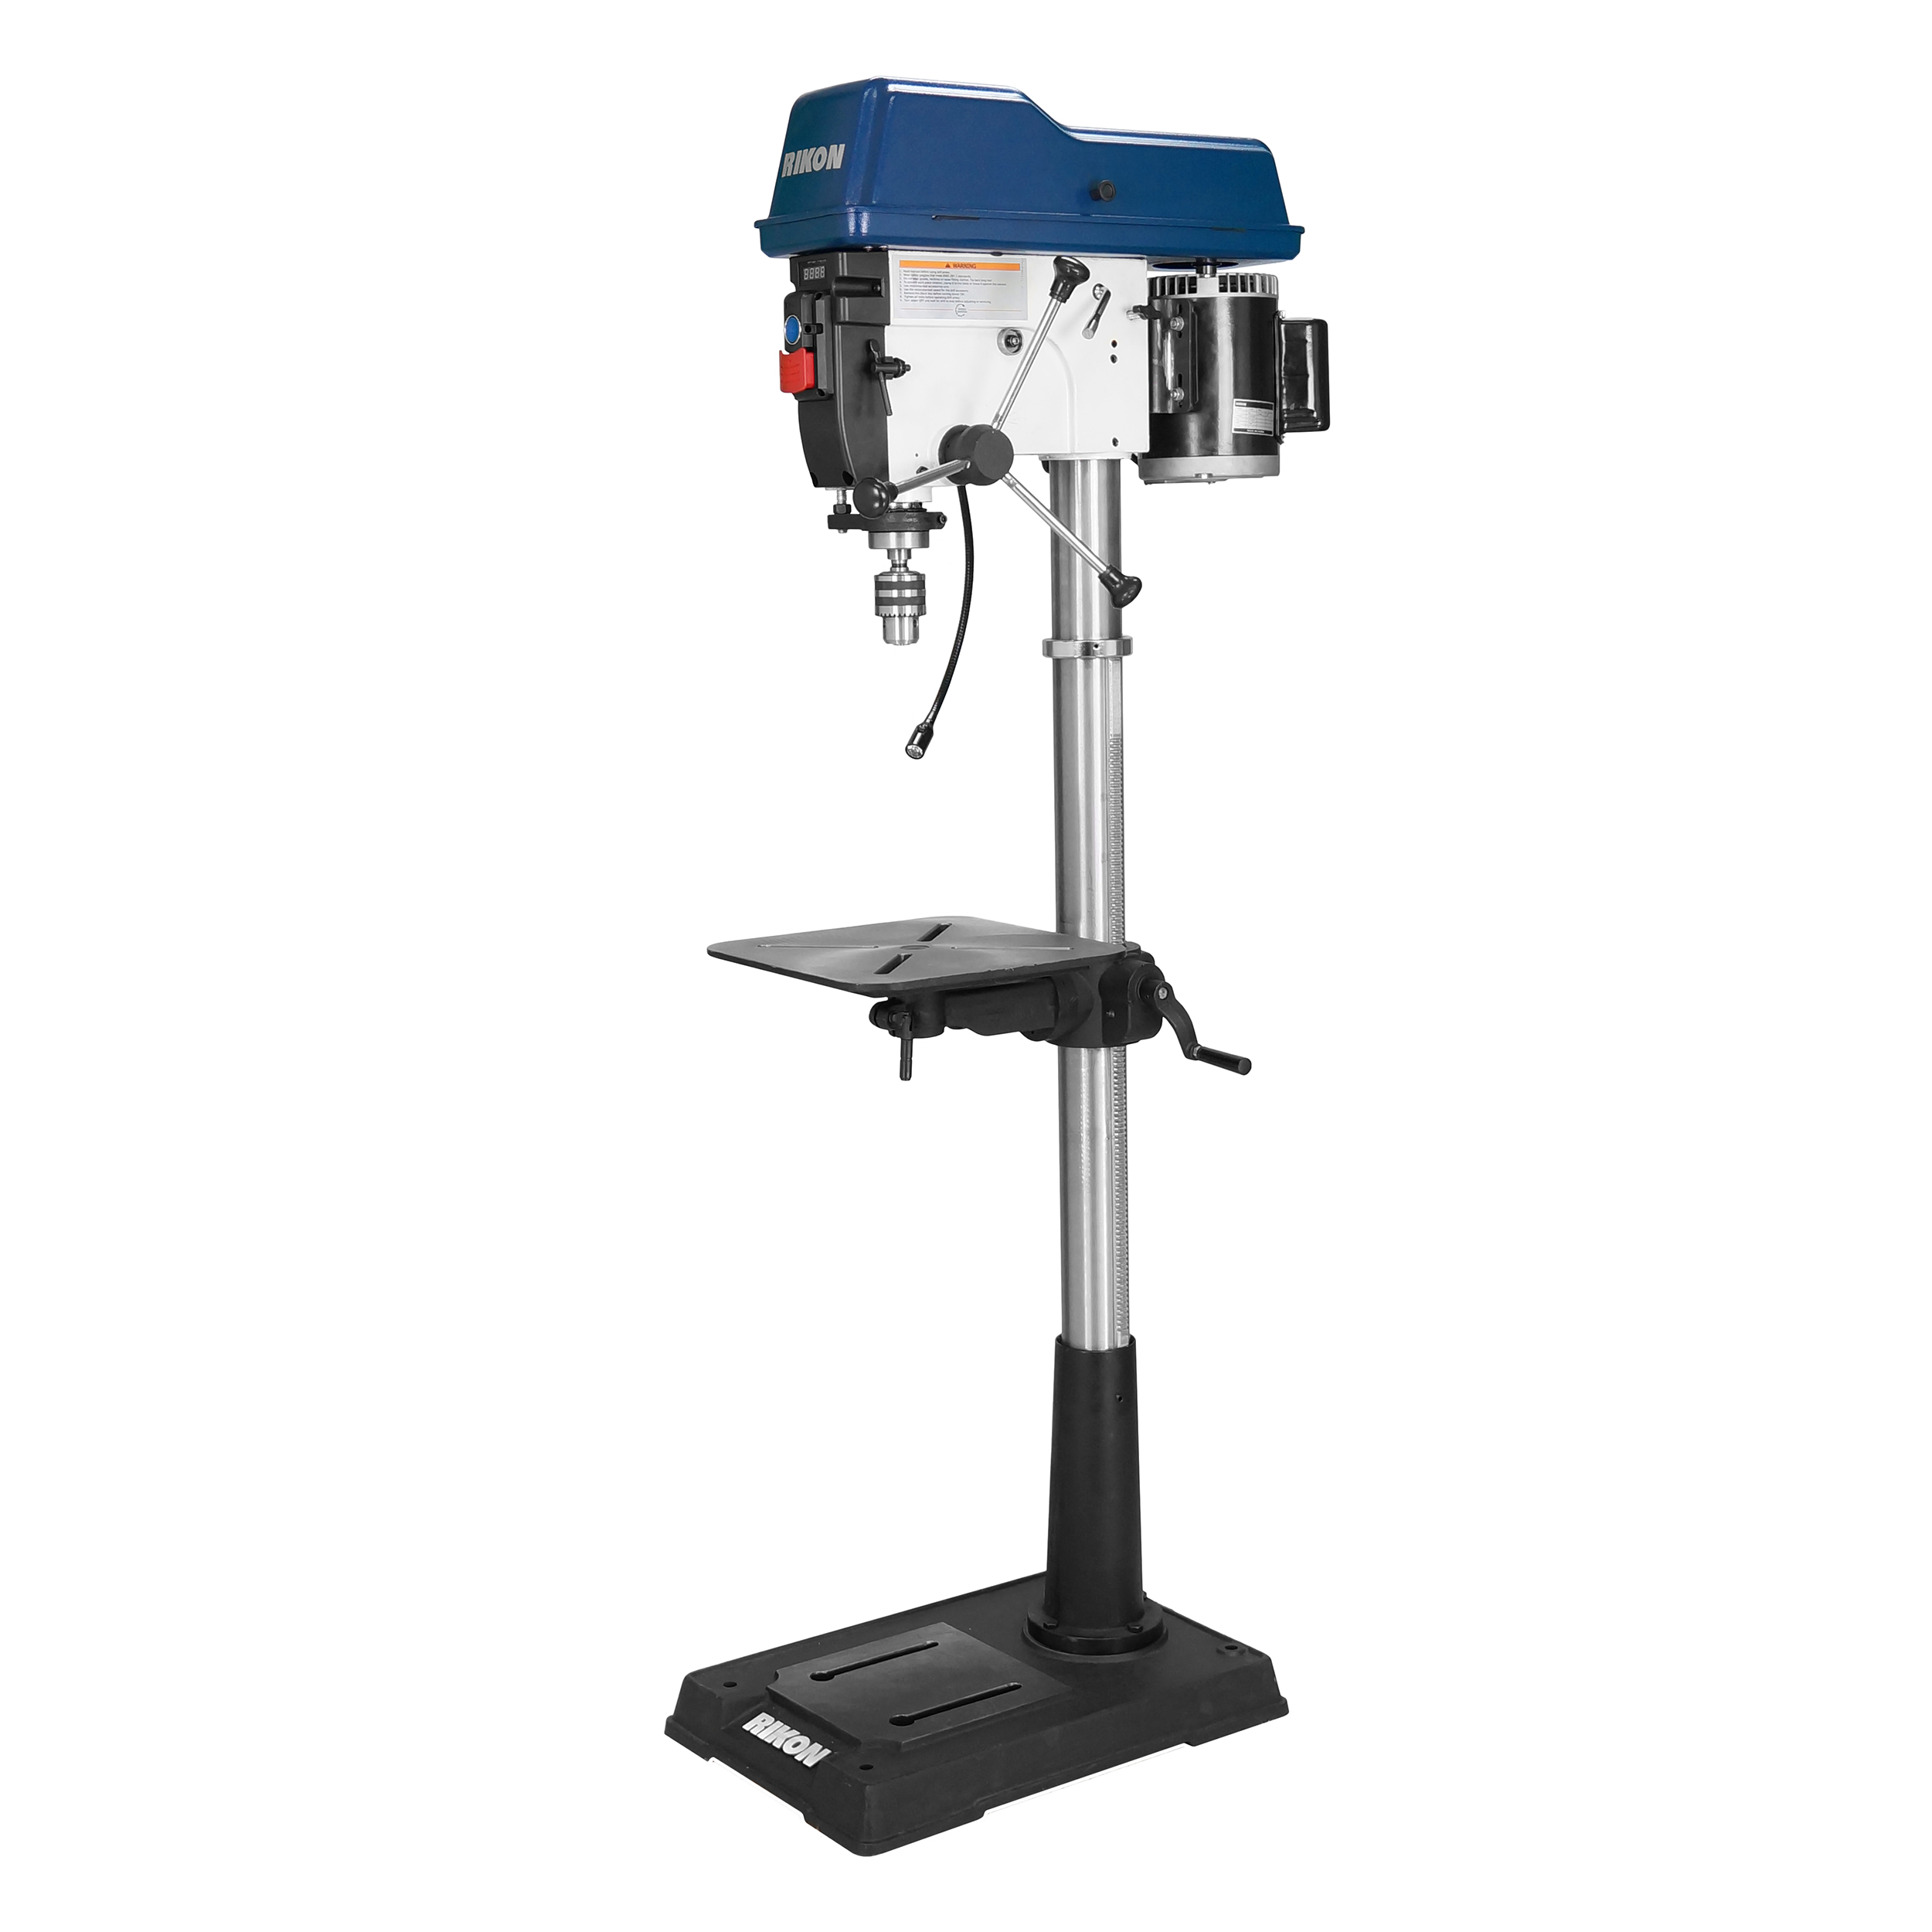 17" Variable Speed 1.5hp Drill Press, 30-217